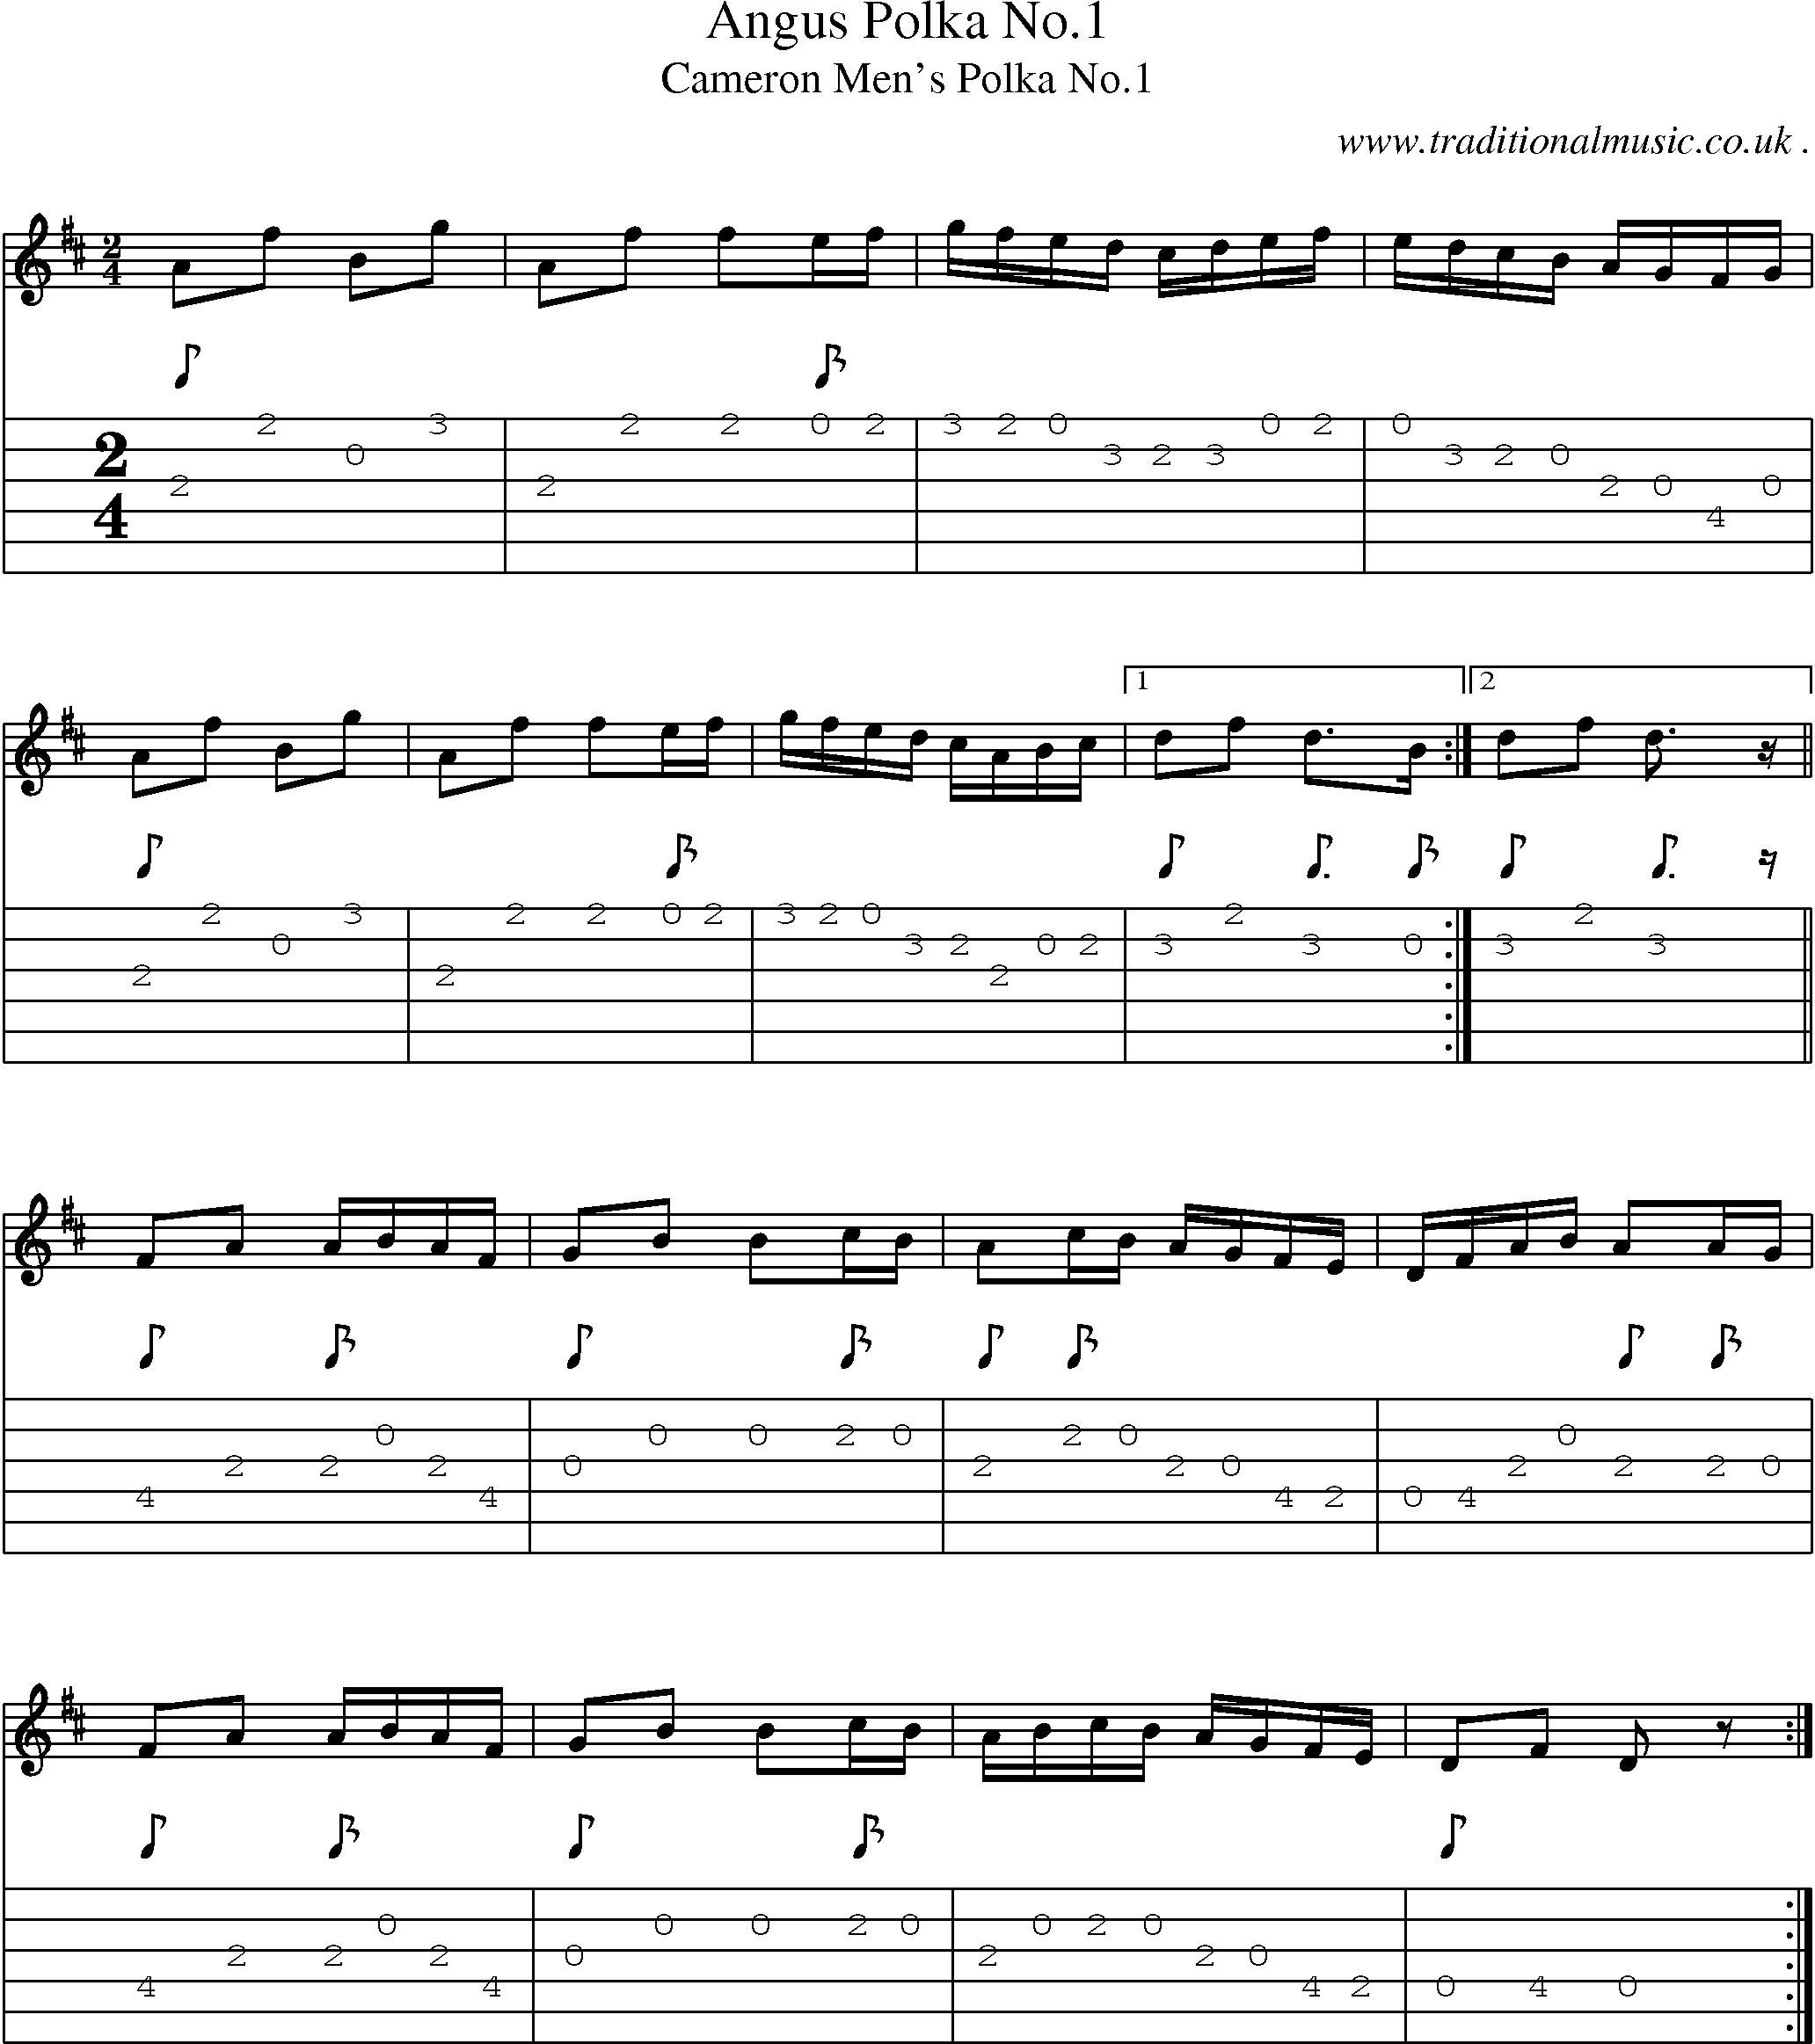 Sheet-music  score, Chords and Guitar Tabs for Angus Polka No1